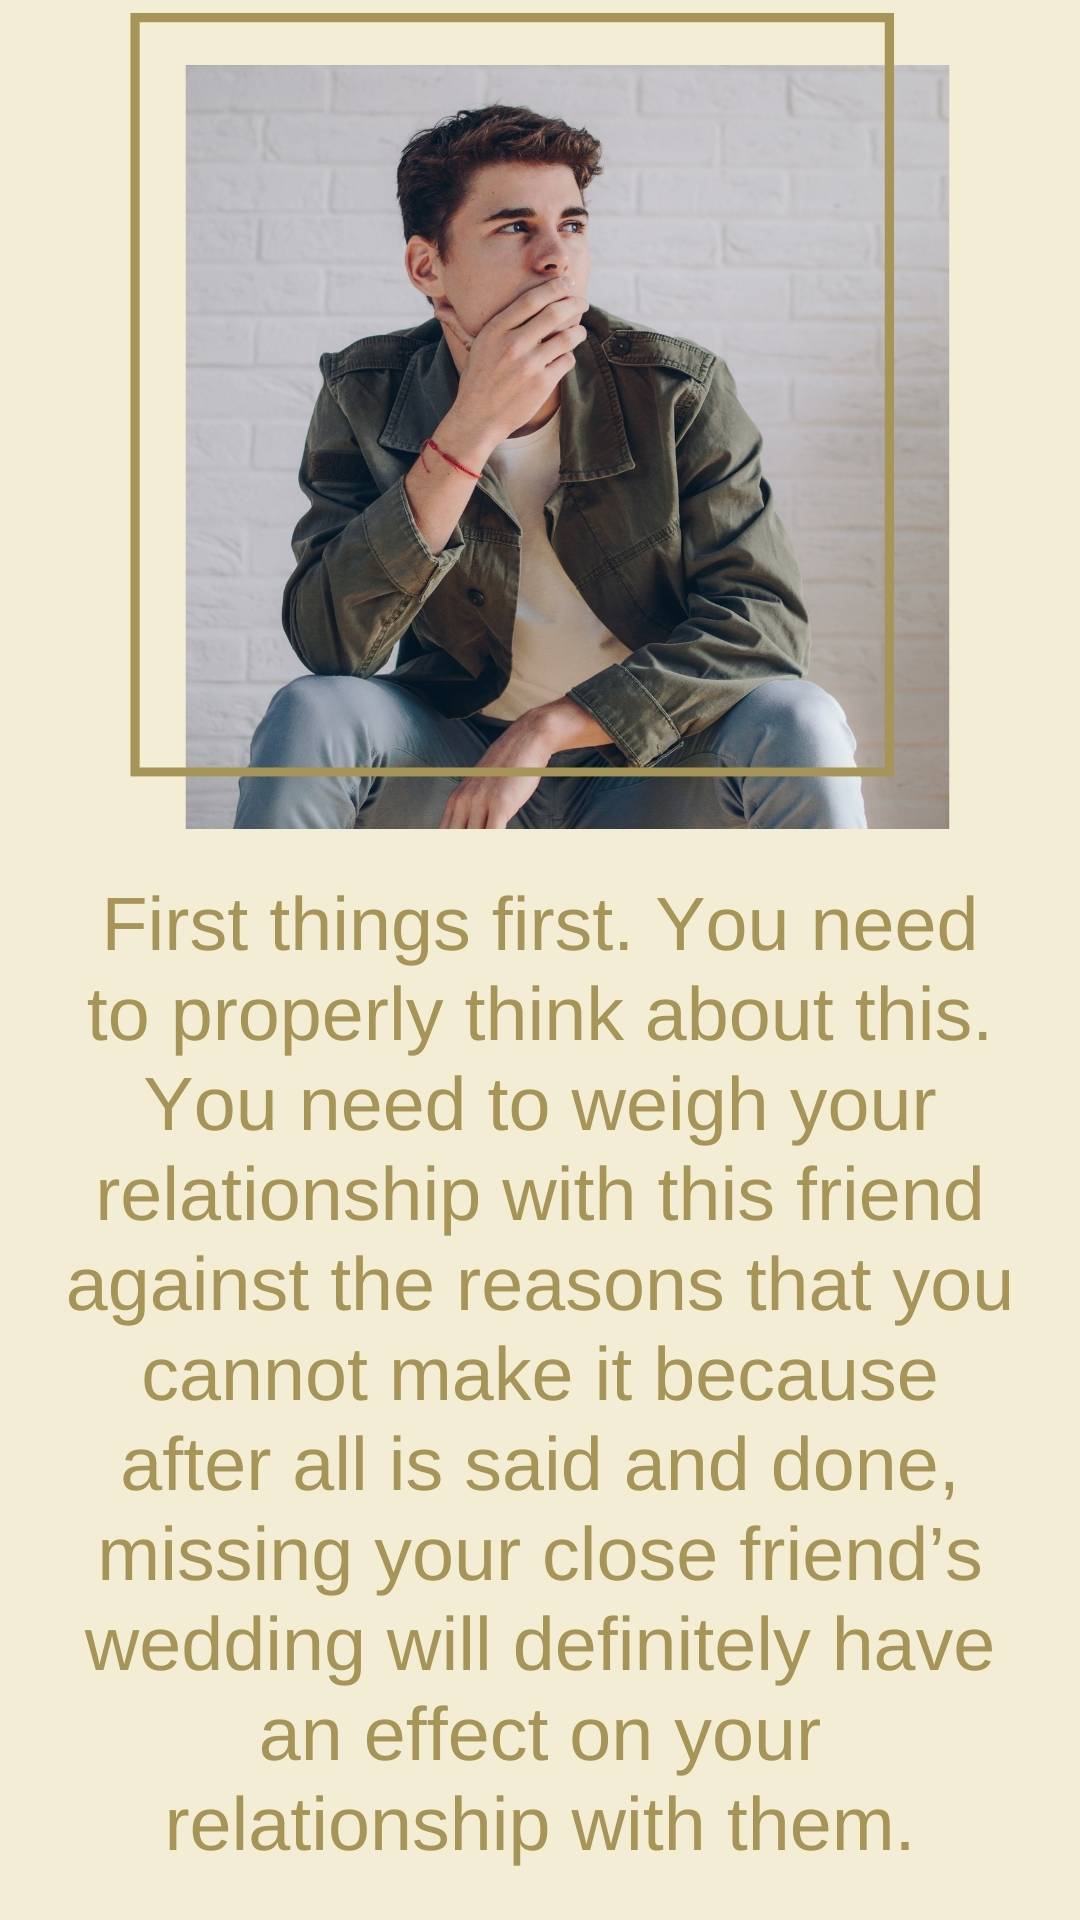 First things first. You need to properly think about this. You need to weigh your relationship with this friend against the reasons that you cannot make it because after all is said and done, missing your close friend’s wedding will definitely have an effect on your relationship with them.